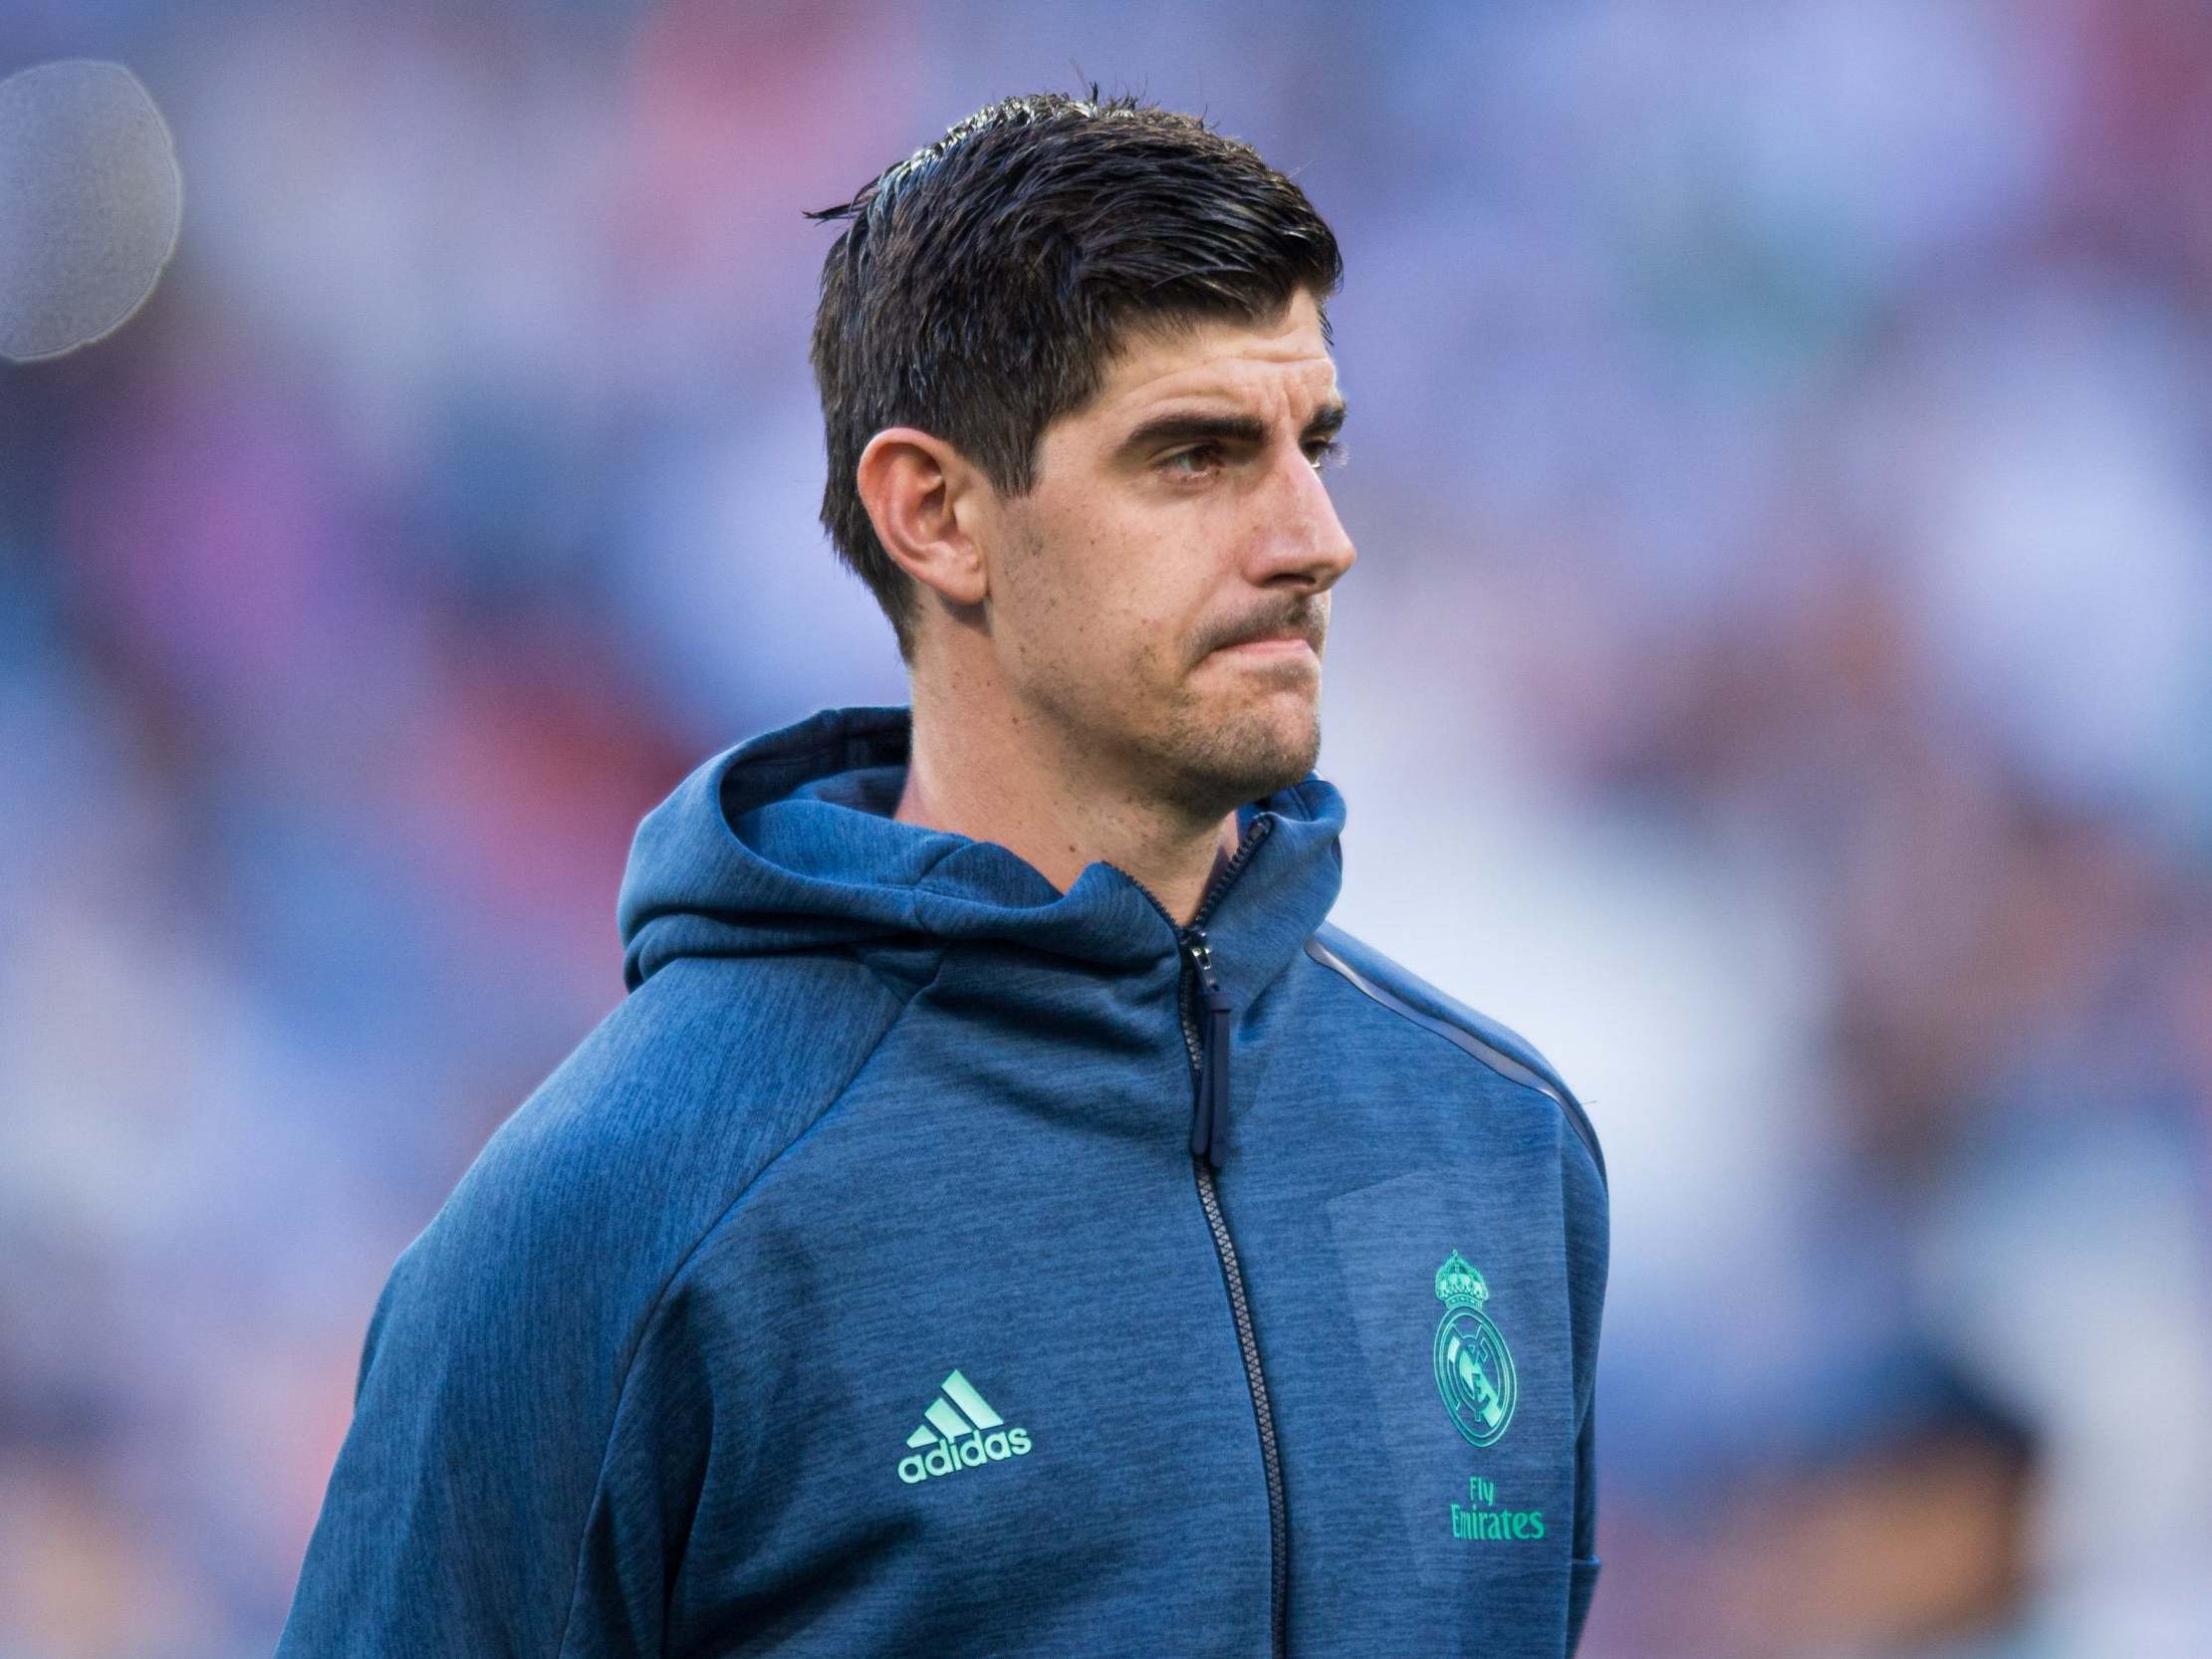 Real Madrid have denied claims that Thibaut Courtois was substituted due to anxiety